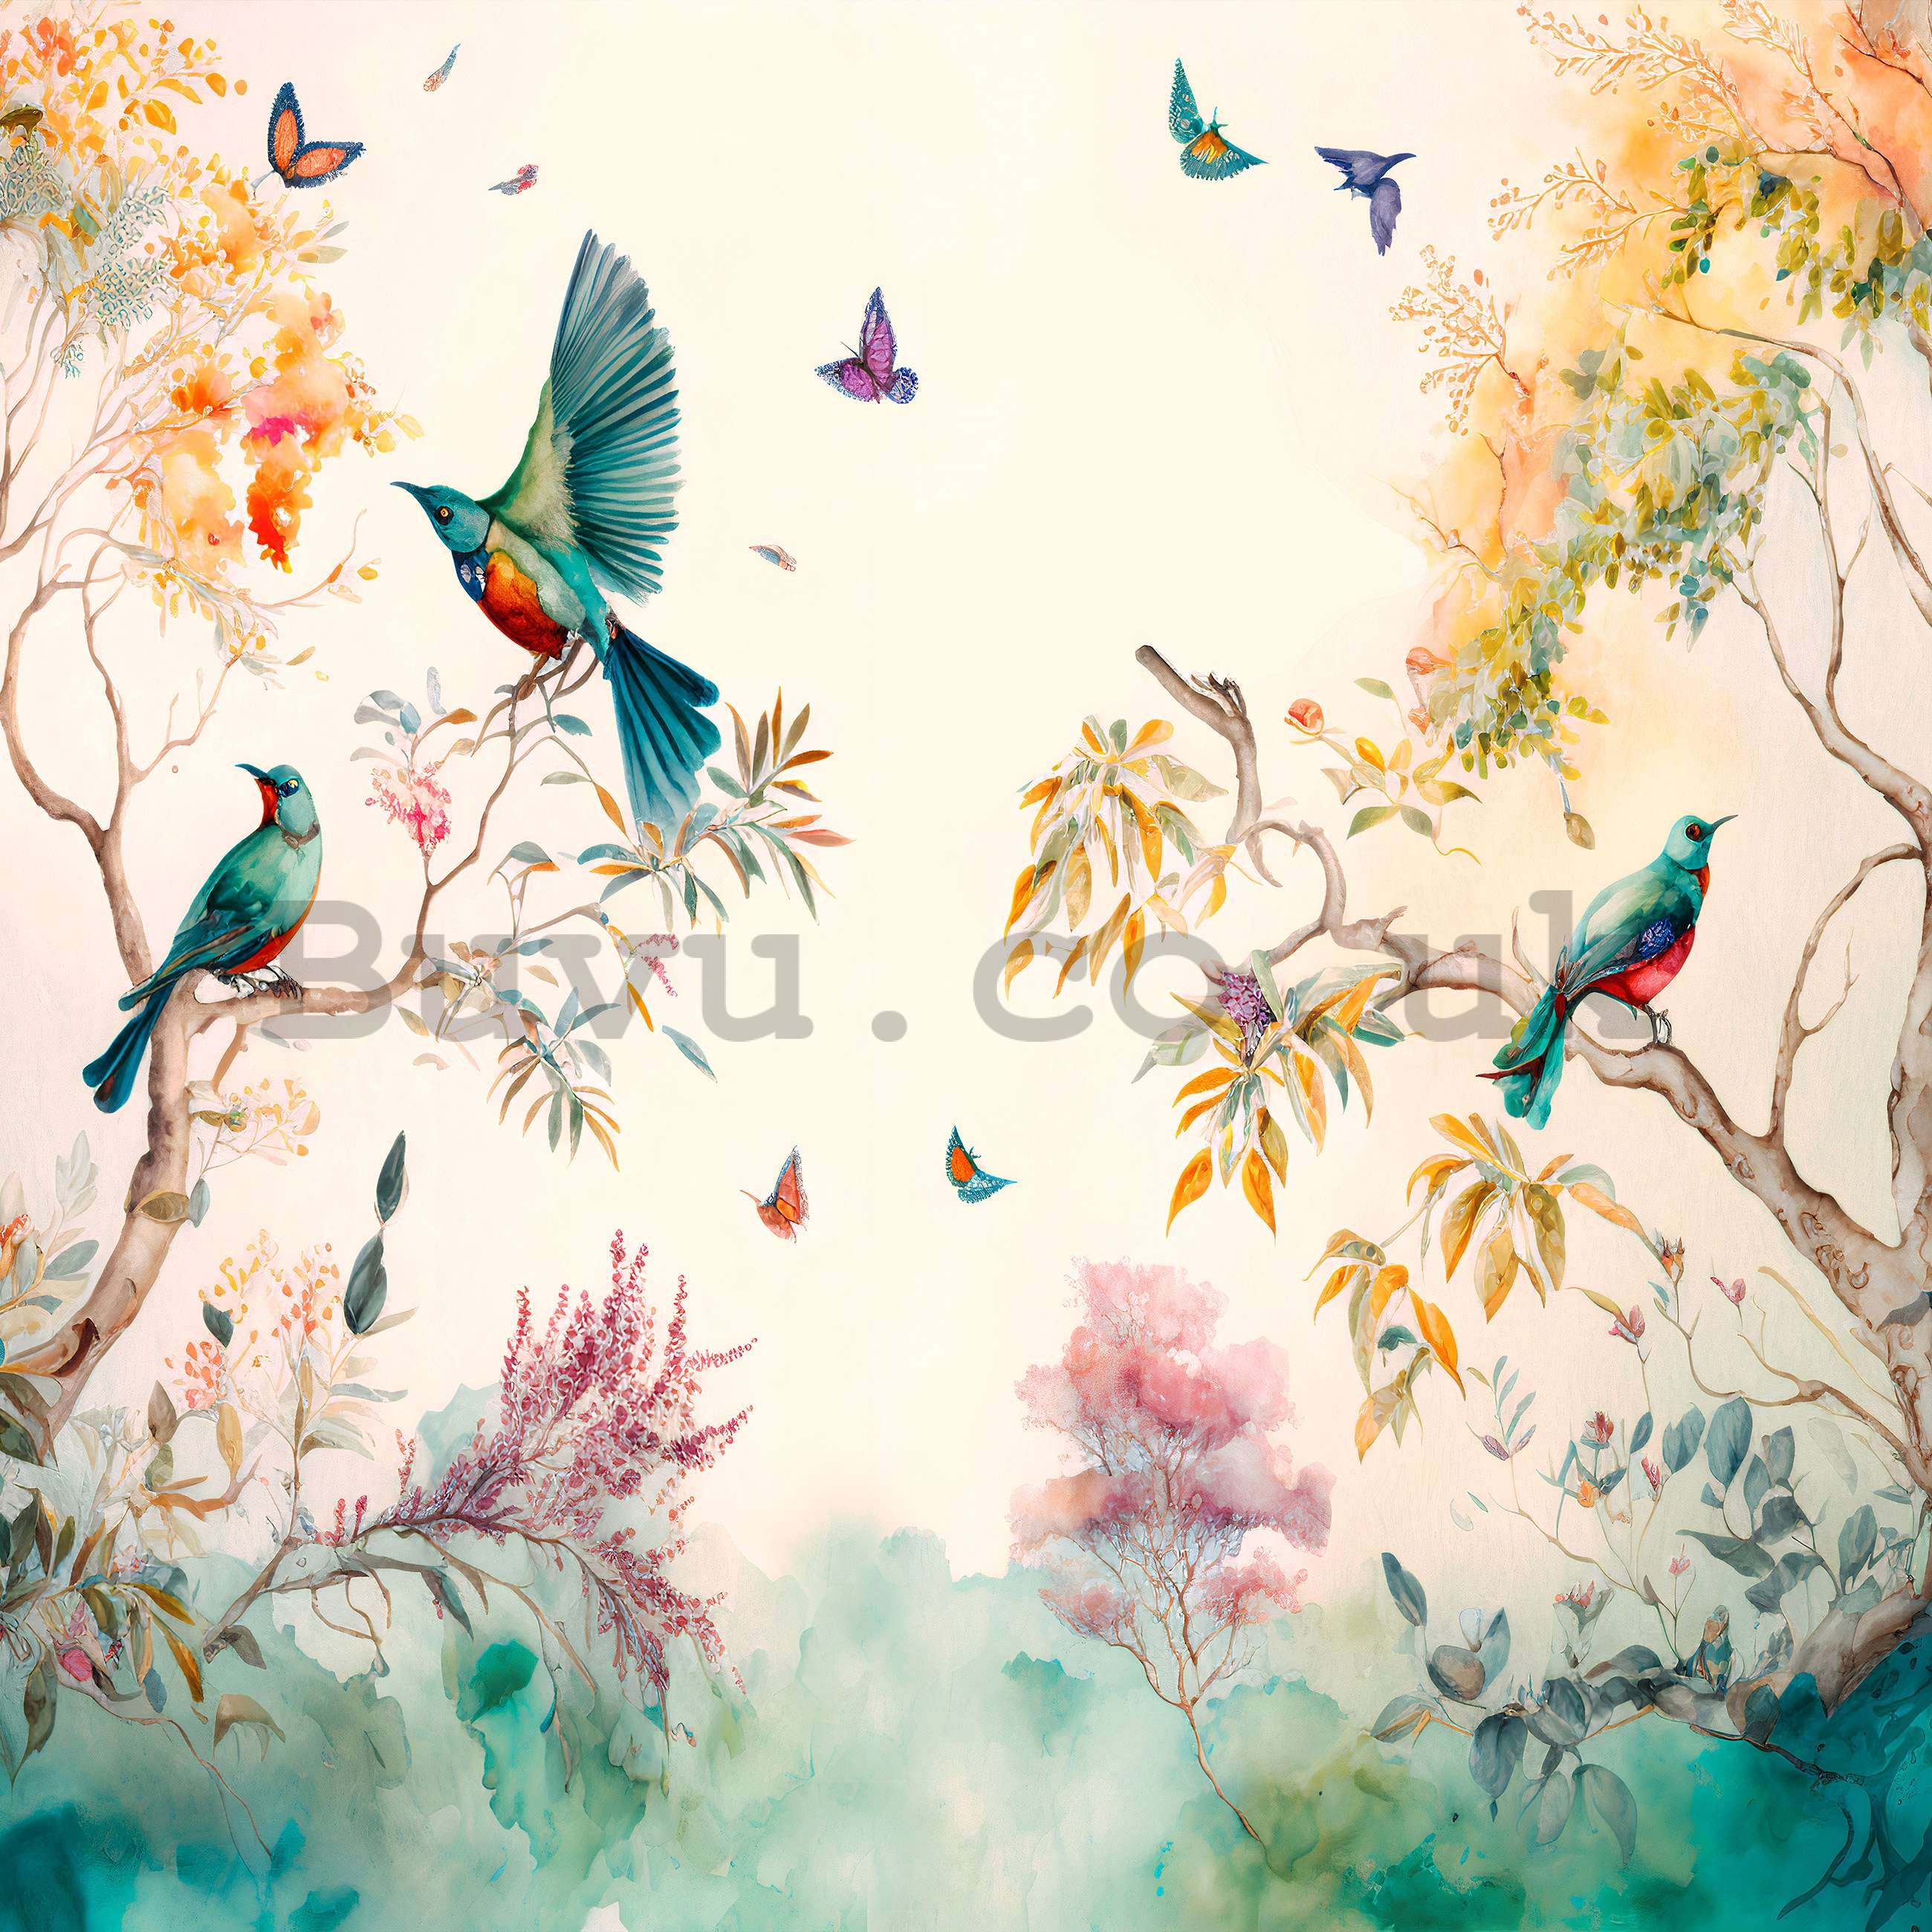 Wall mural vlies: Birds on trees (painted) - 254x184 cm